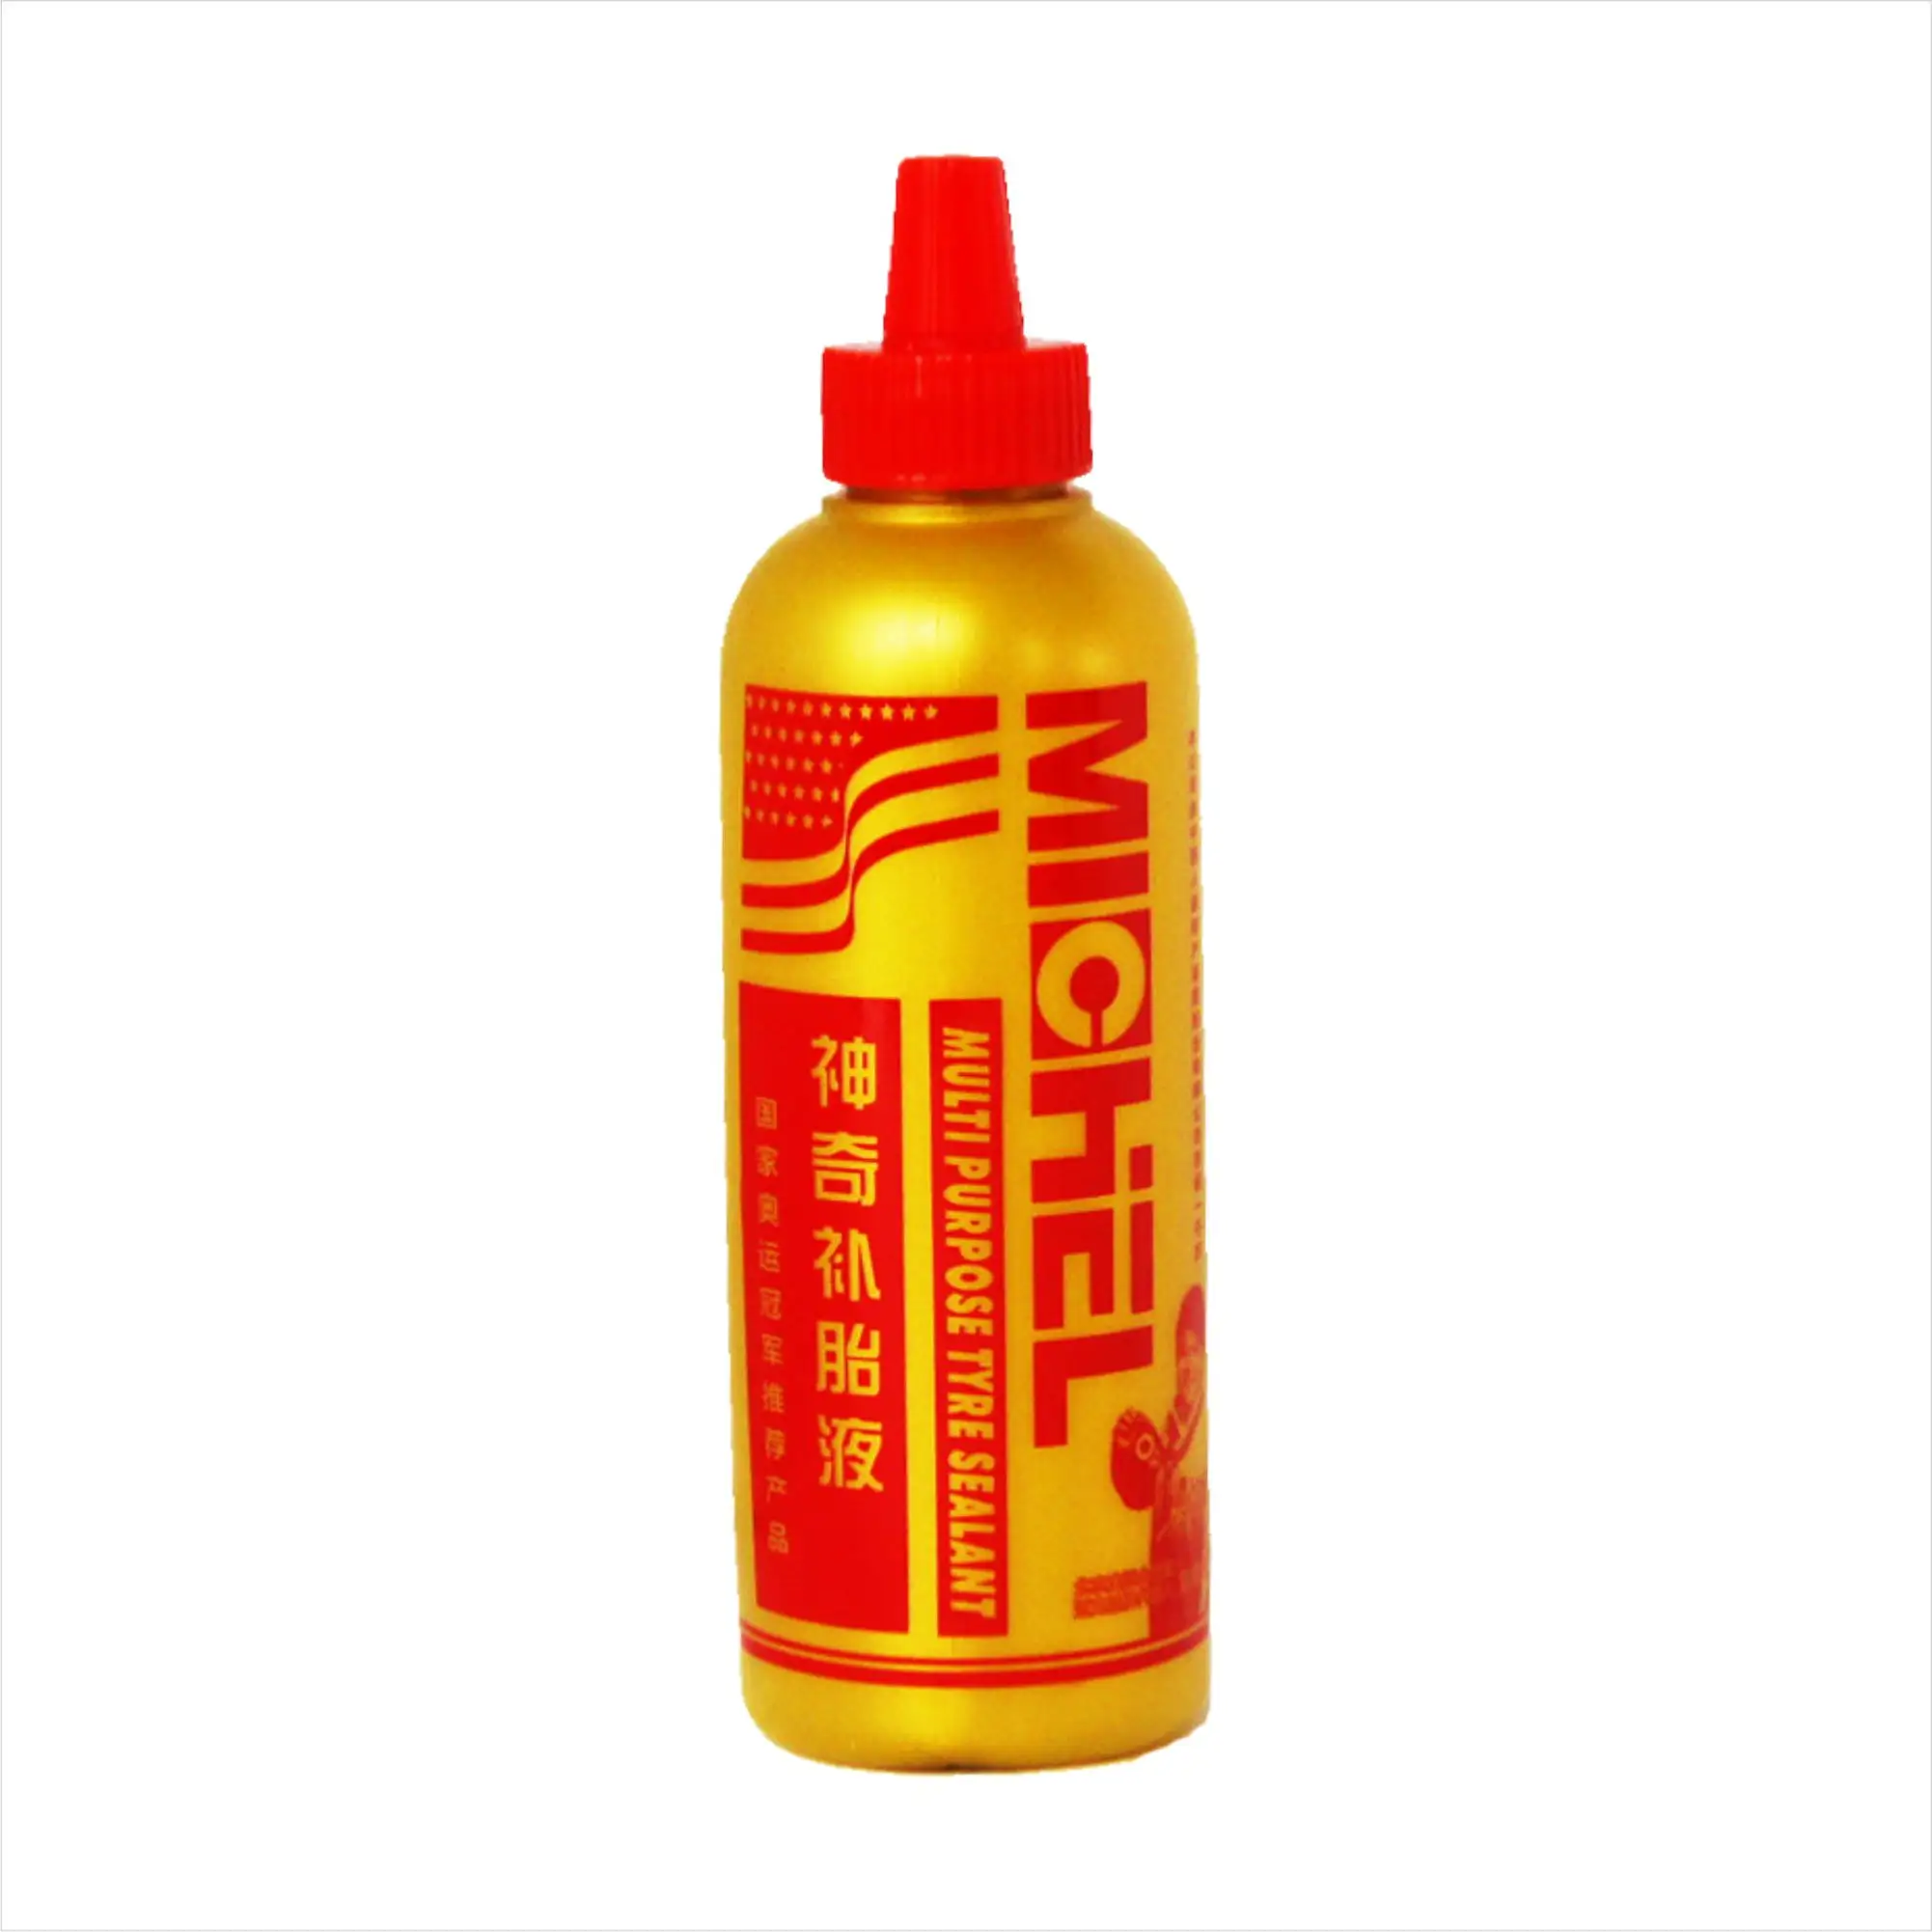 350ml Magic Seal Fast Liquid Tyre Sealant For Tubeless Tire Puncture